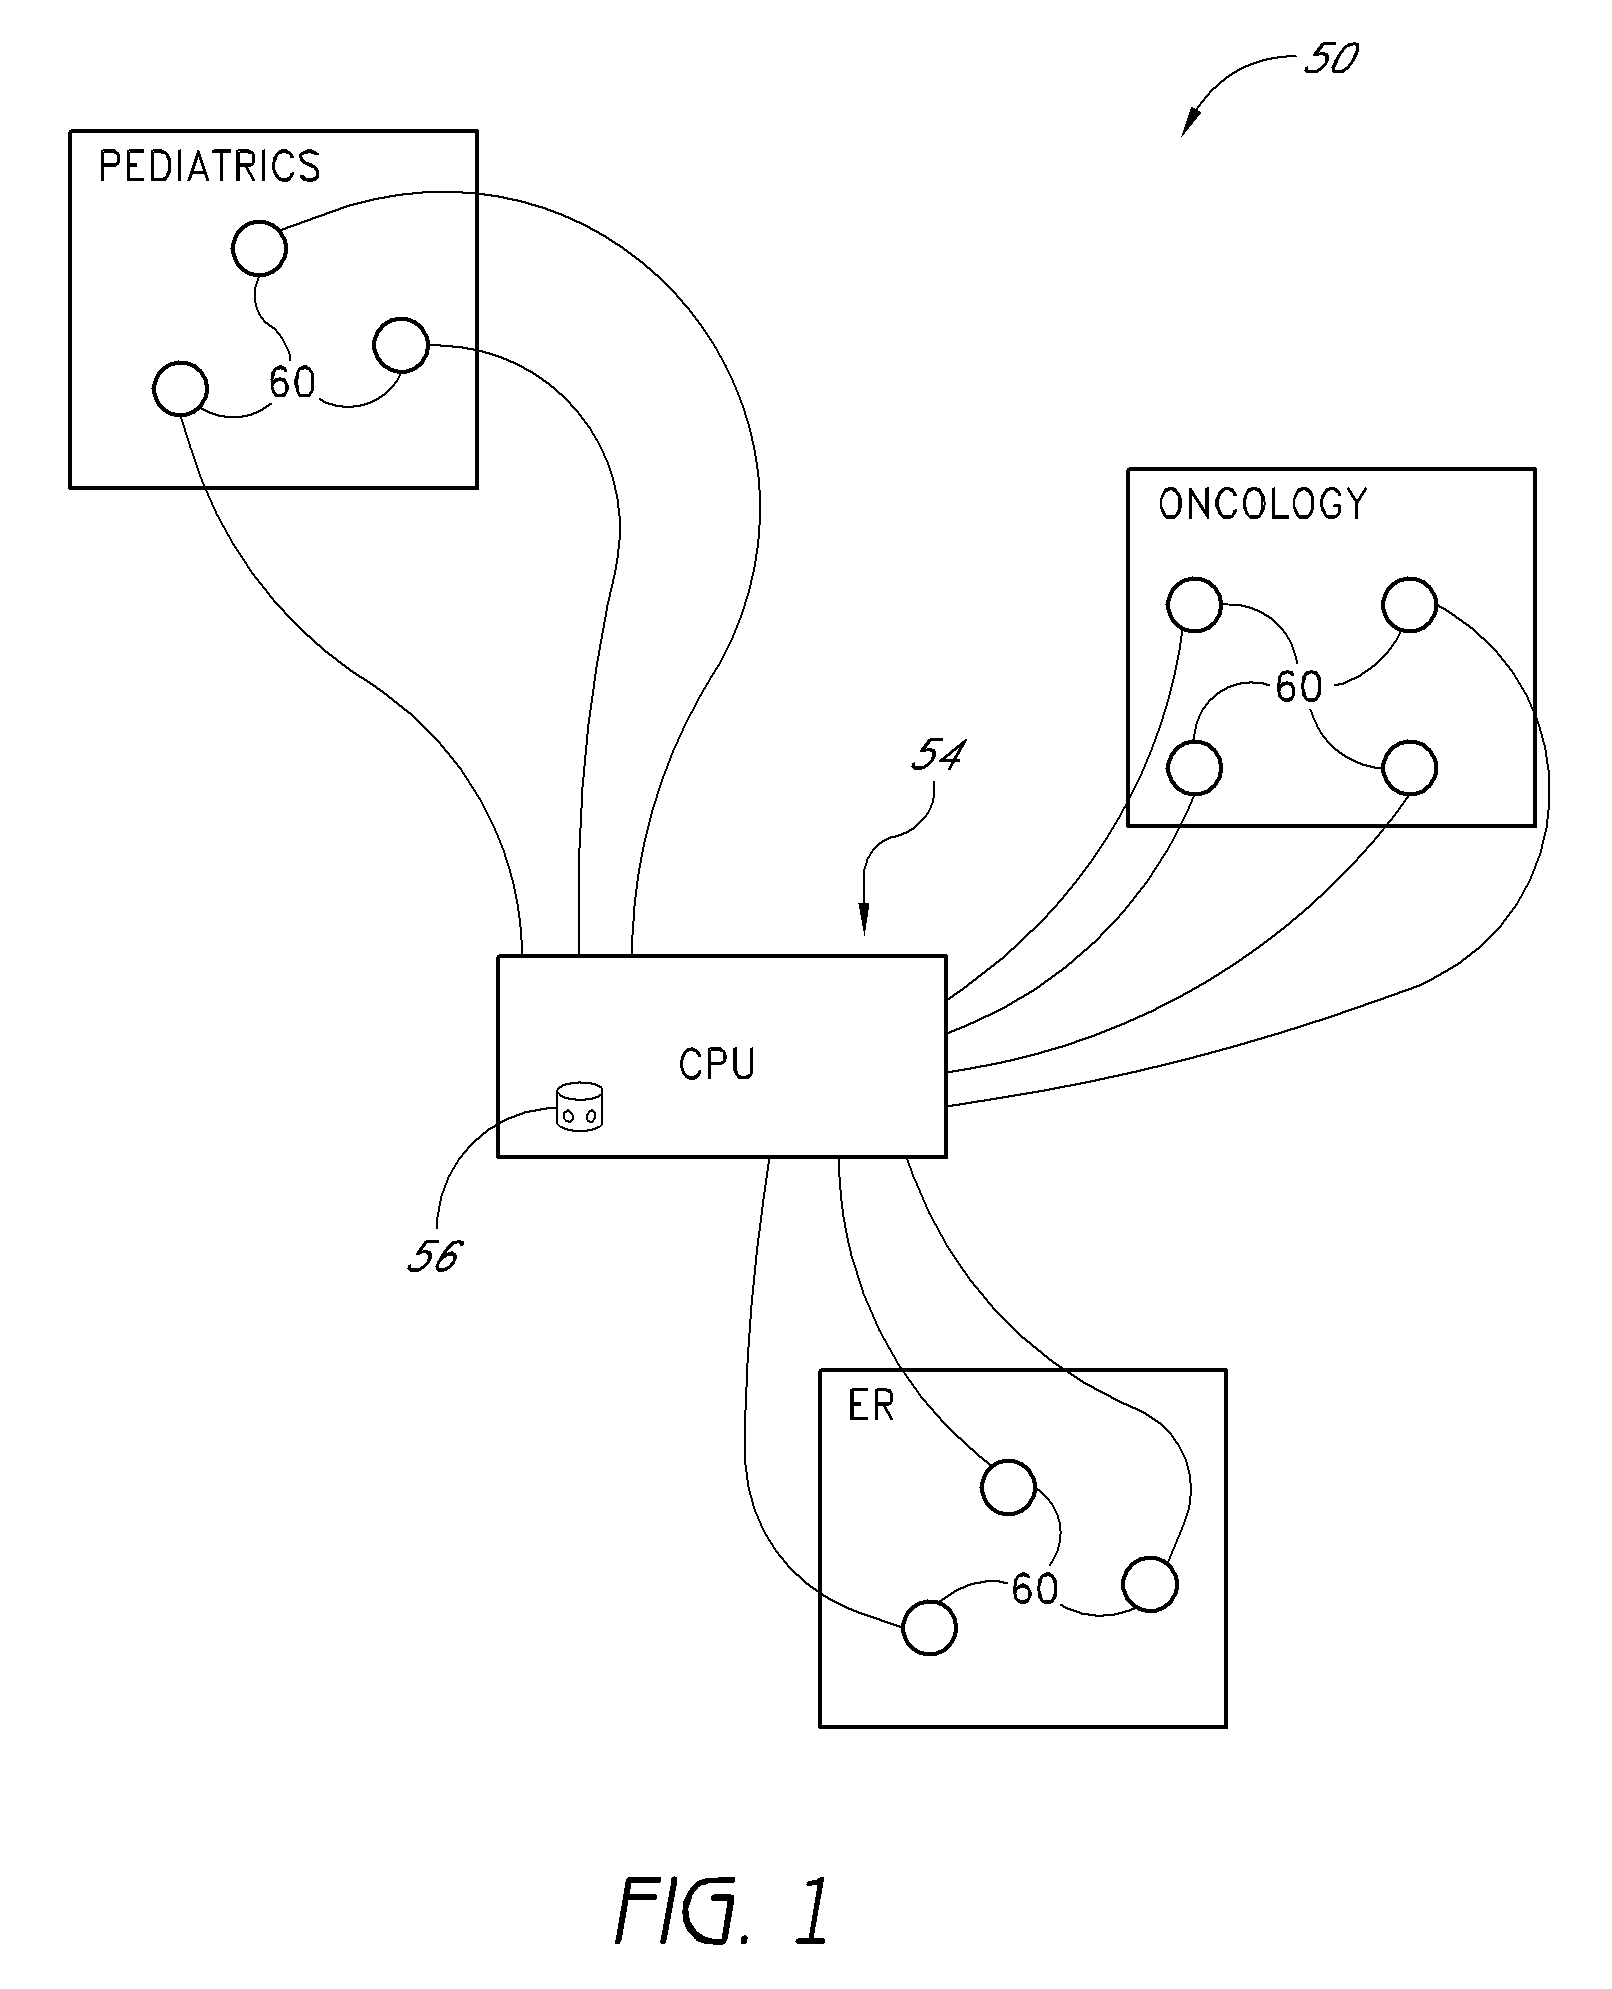 Method for Combined Disposal and Dispensing of Medical Items